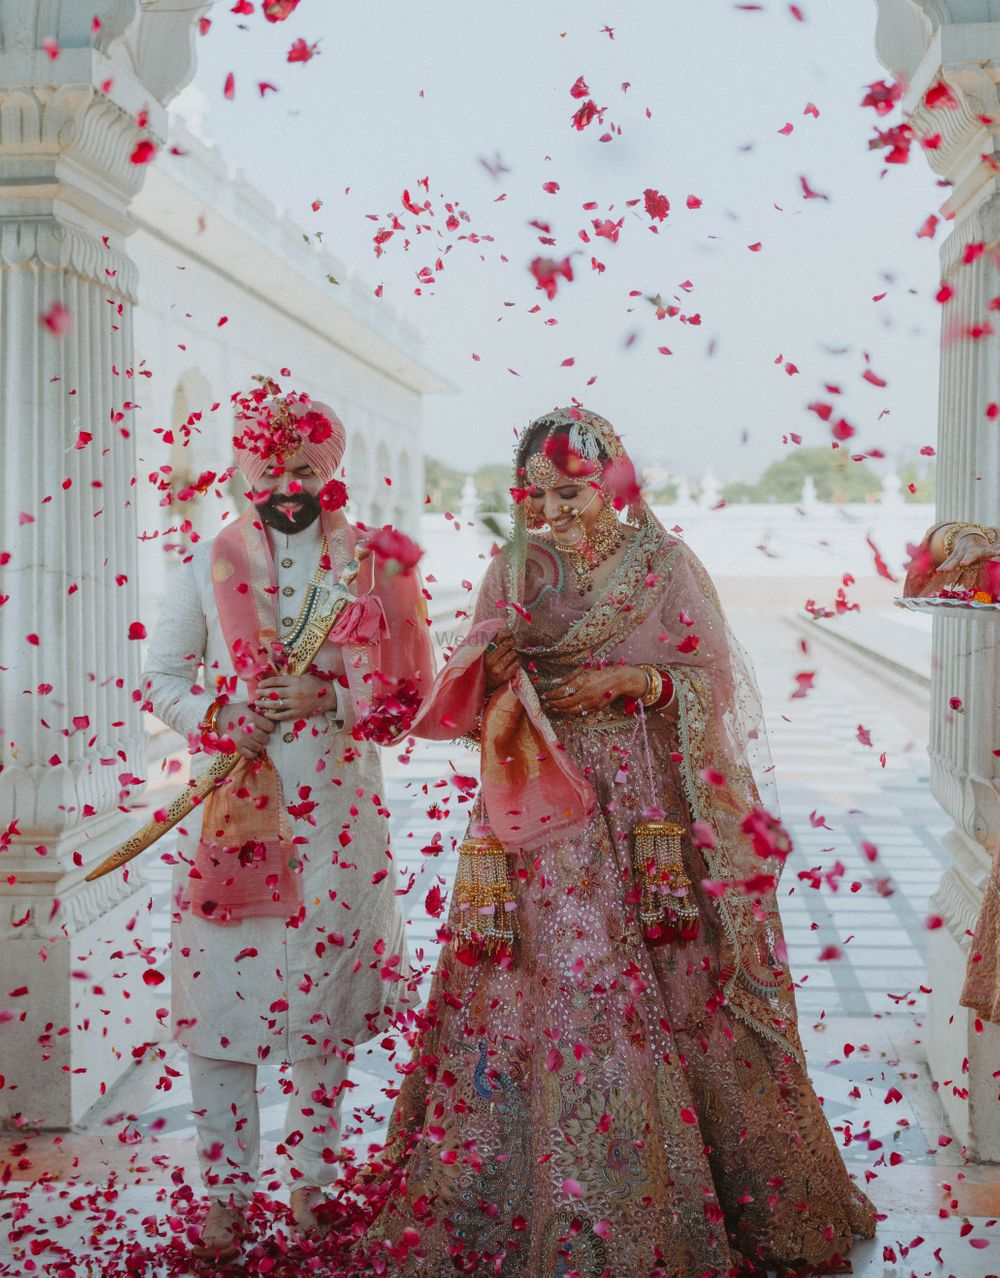 Photo of flower shower on couple during their wedding day